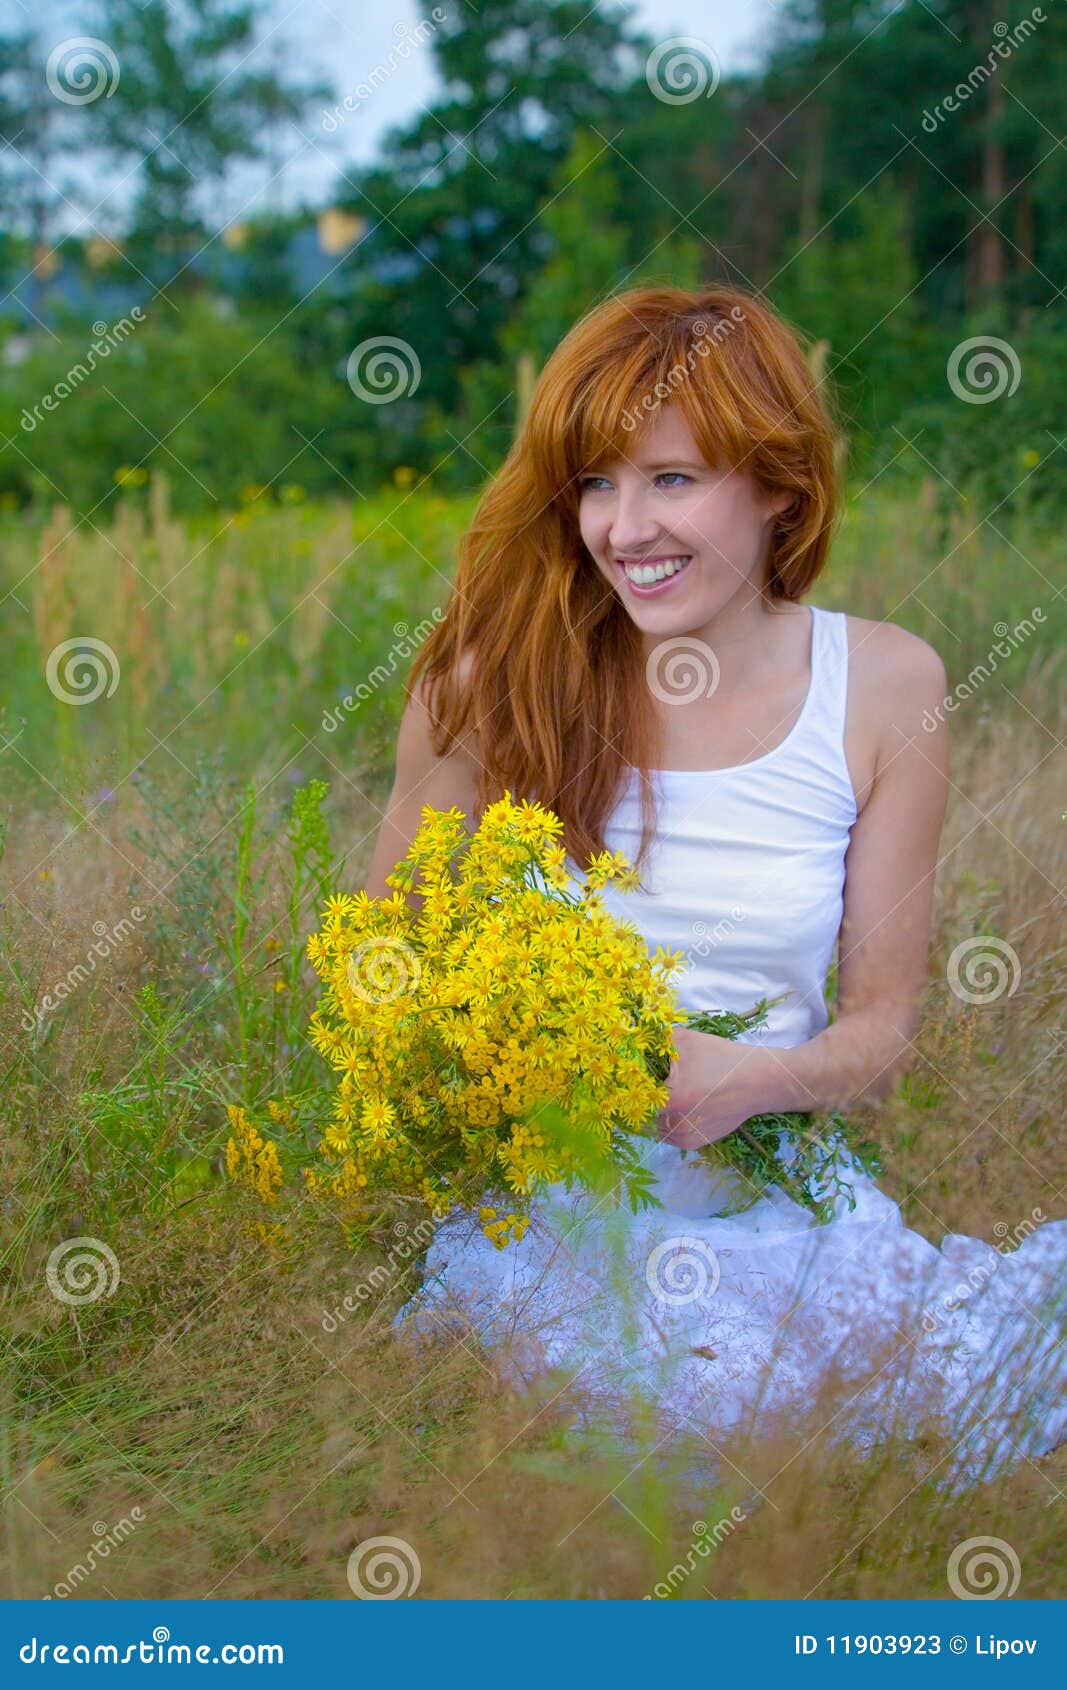 Young Woman with Bouquet of Wild Flowers Stock Image - Image of outdoor ...